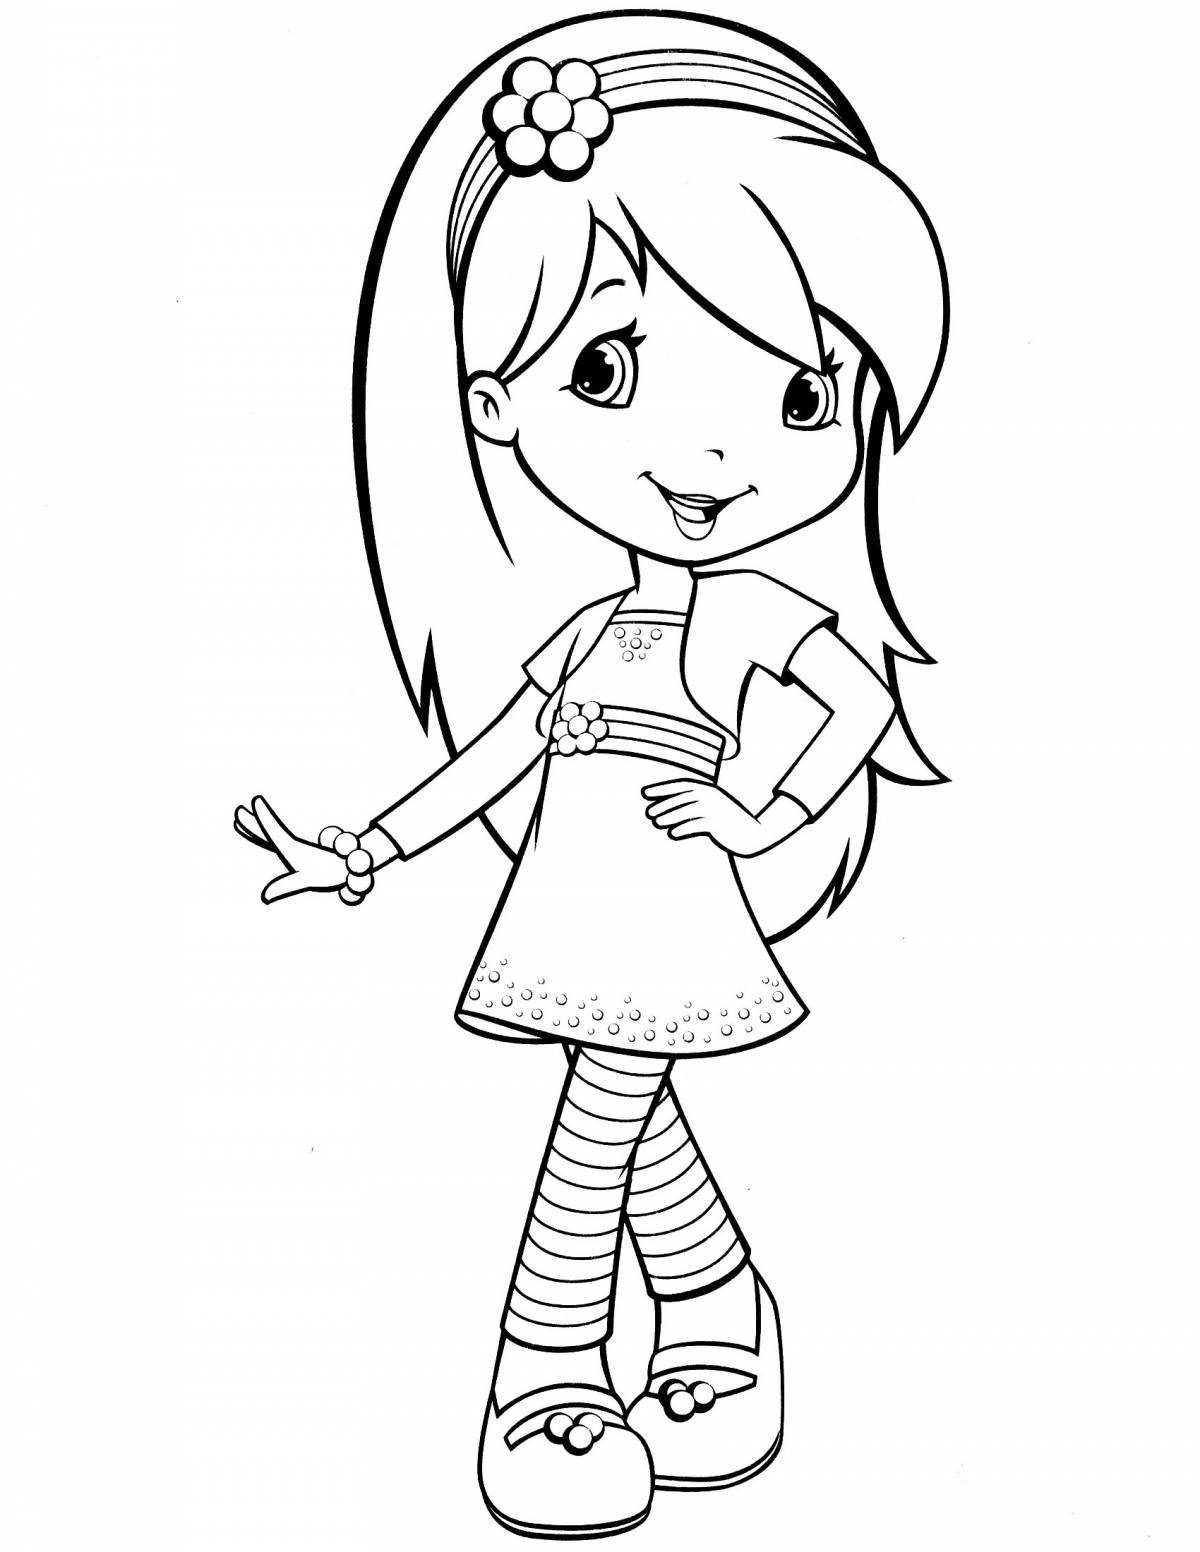 Coloring page glamor women of fashion